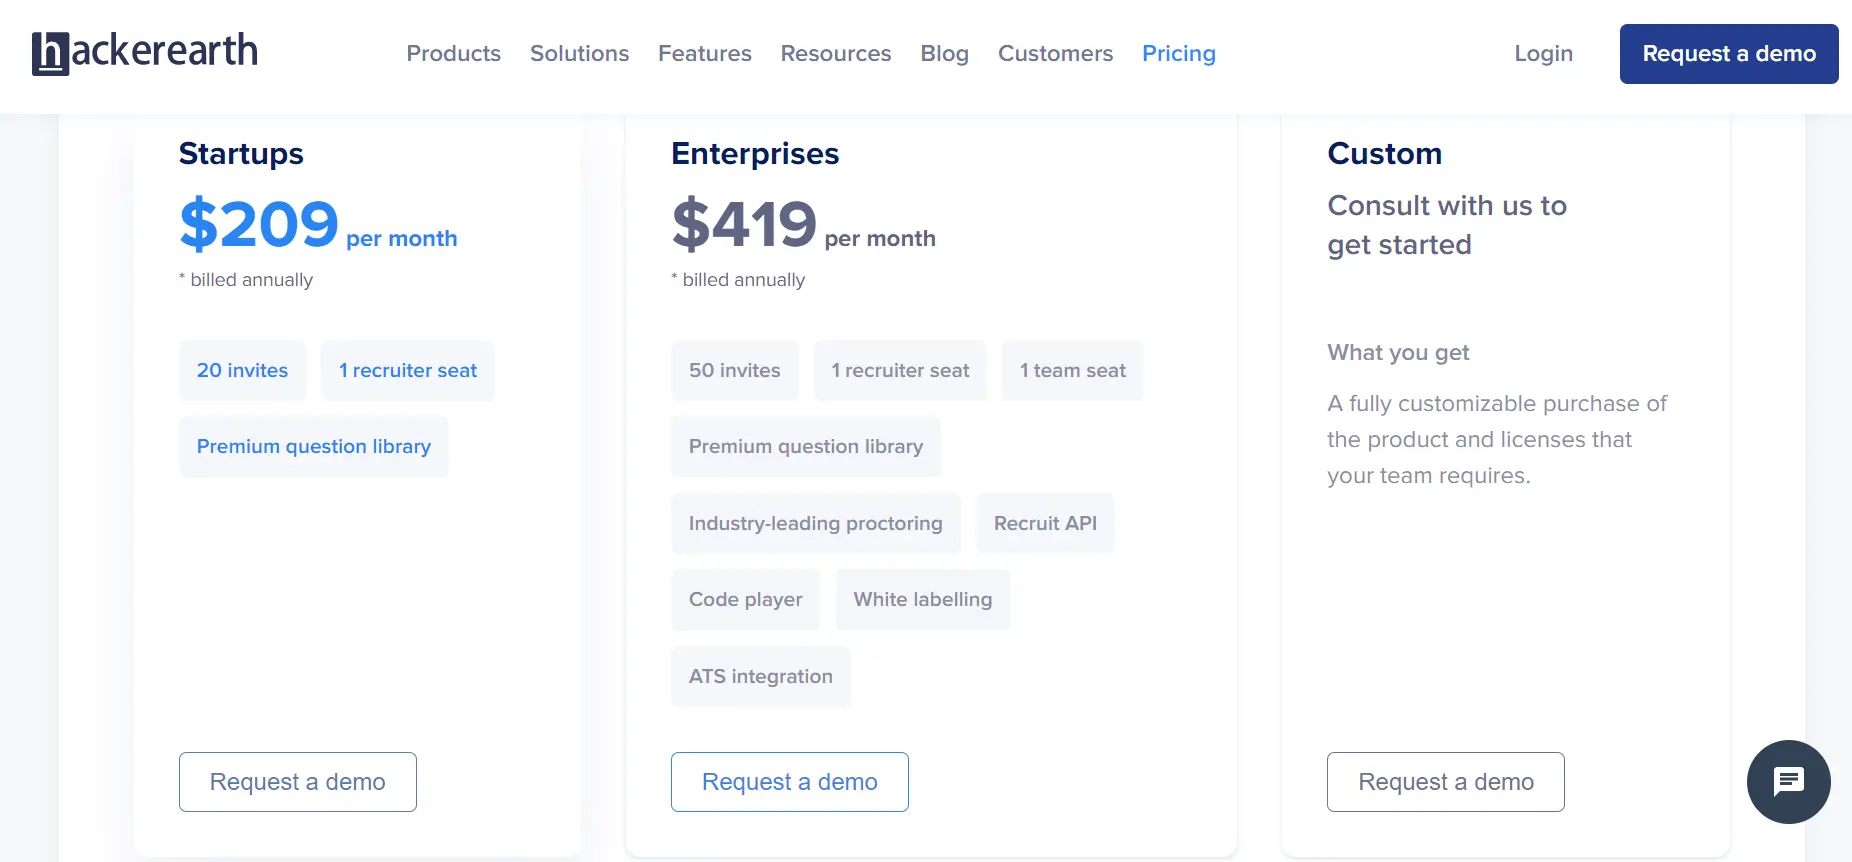 A screenshot of HackerEarth’s pricing page